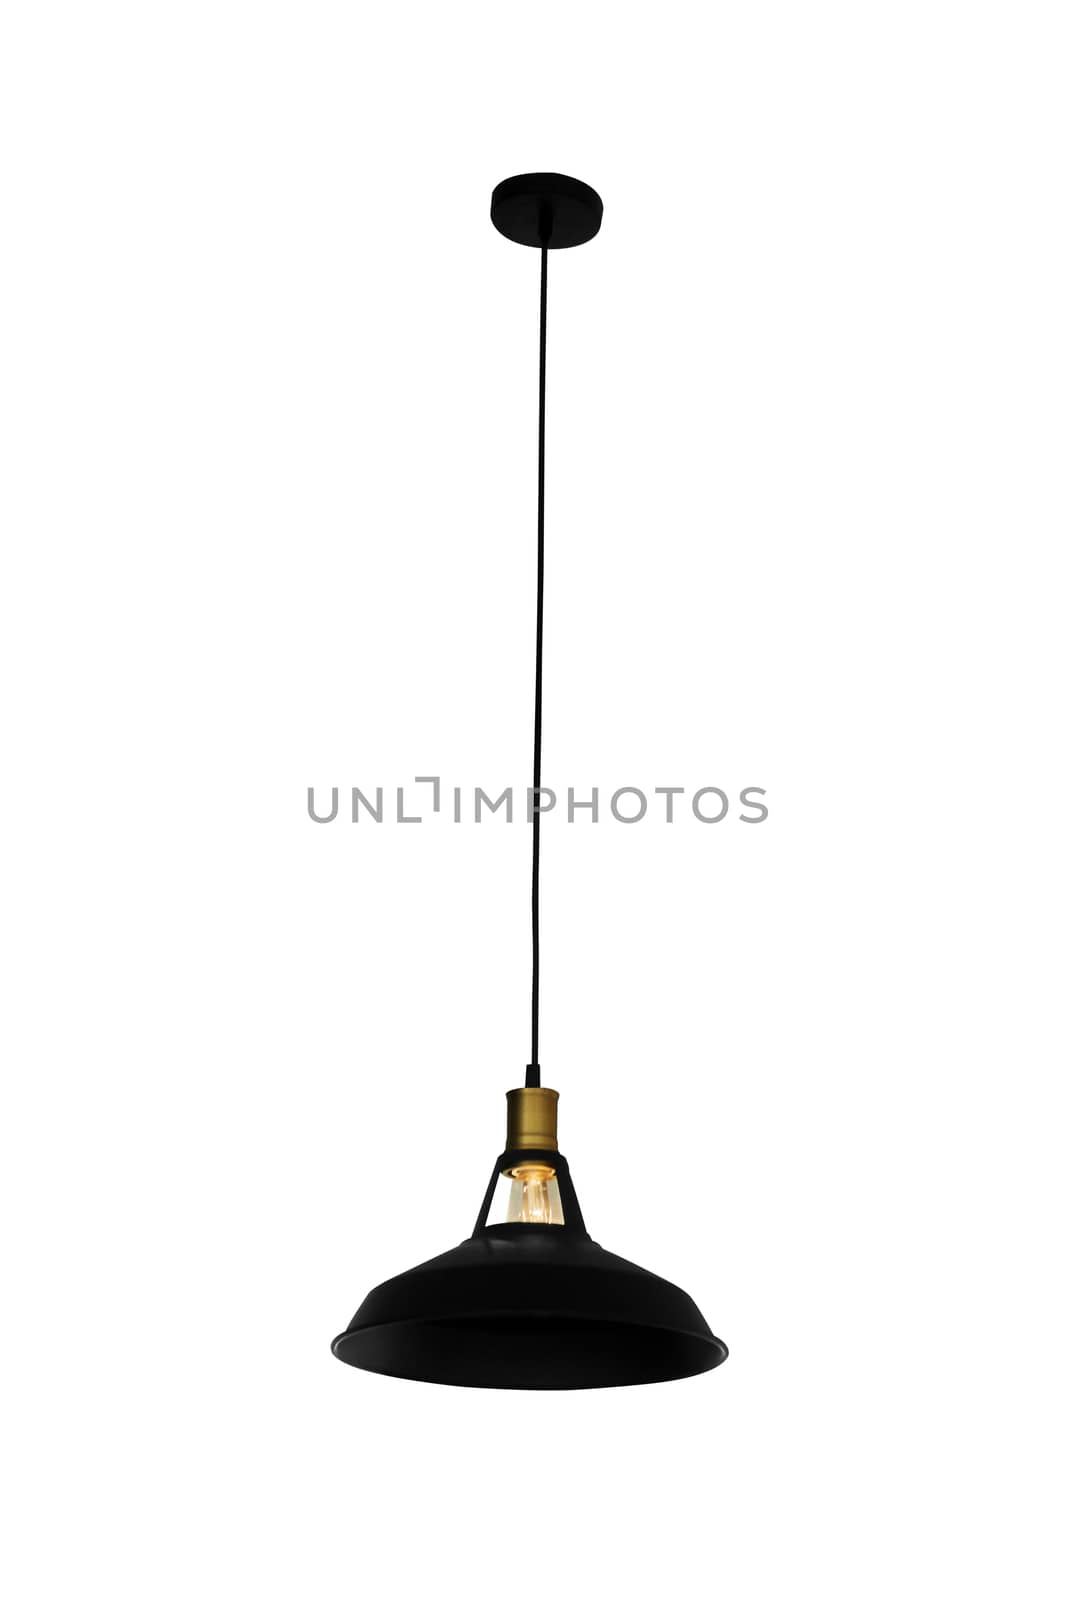 Black hanging lamp isolated. by NuwatPhoto